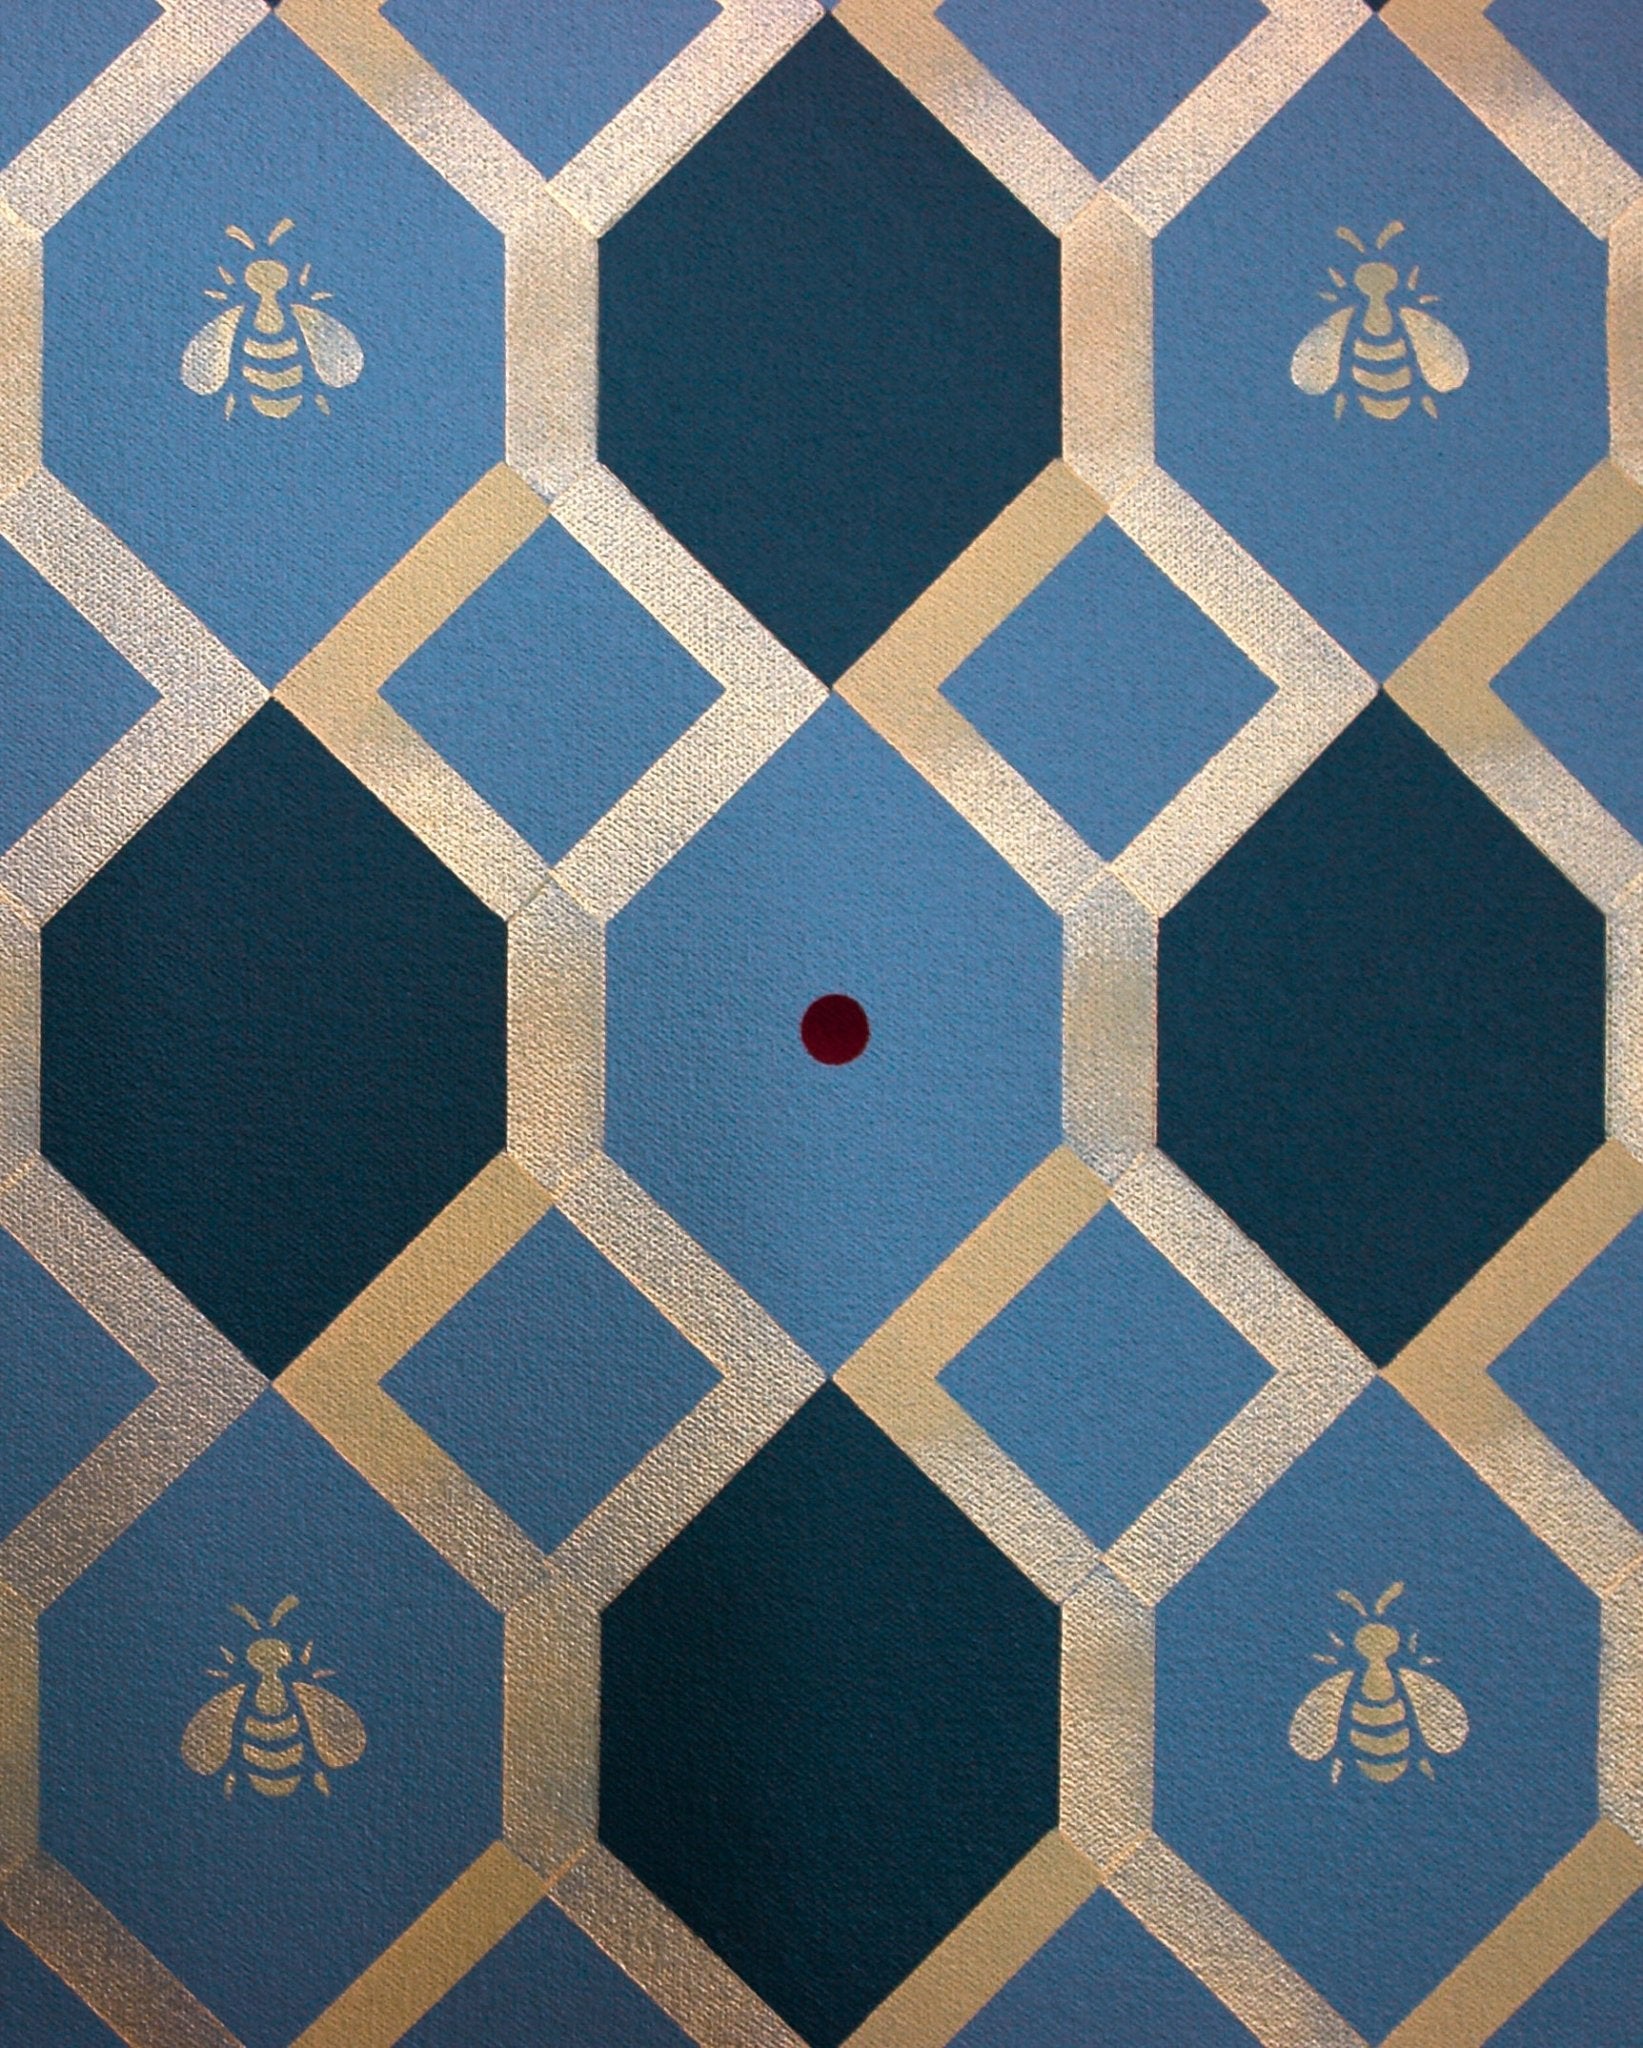 A close up of the center pattern of Honeycomb Floorcloth #2.